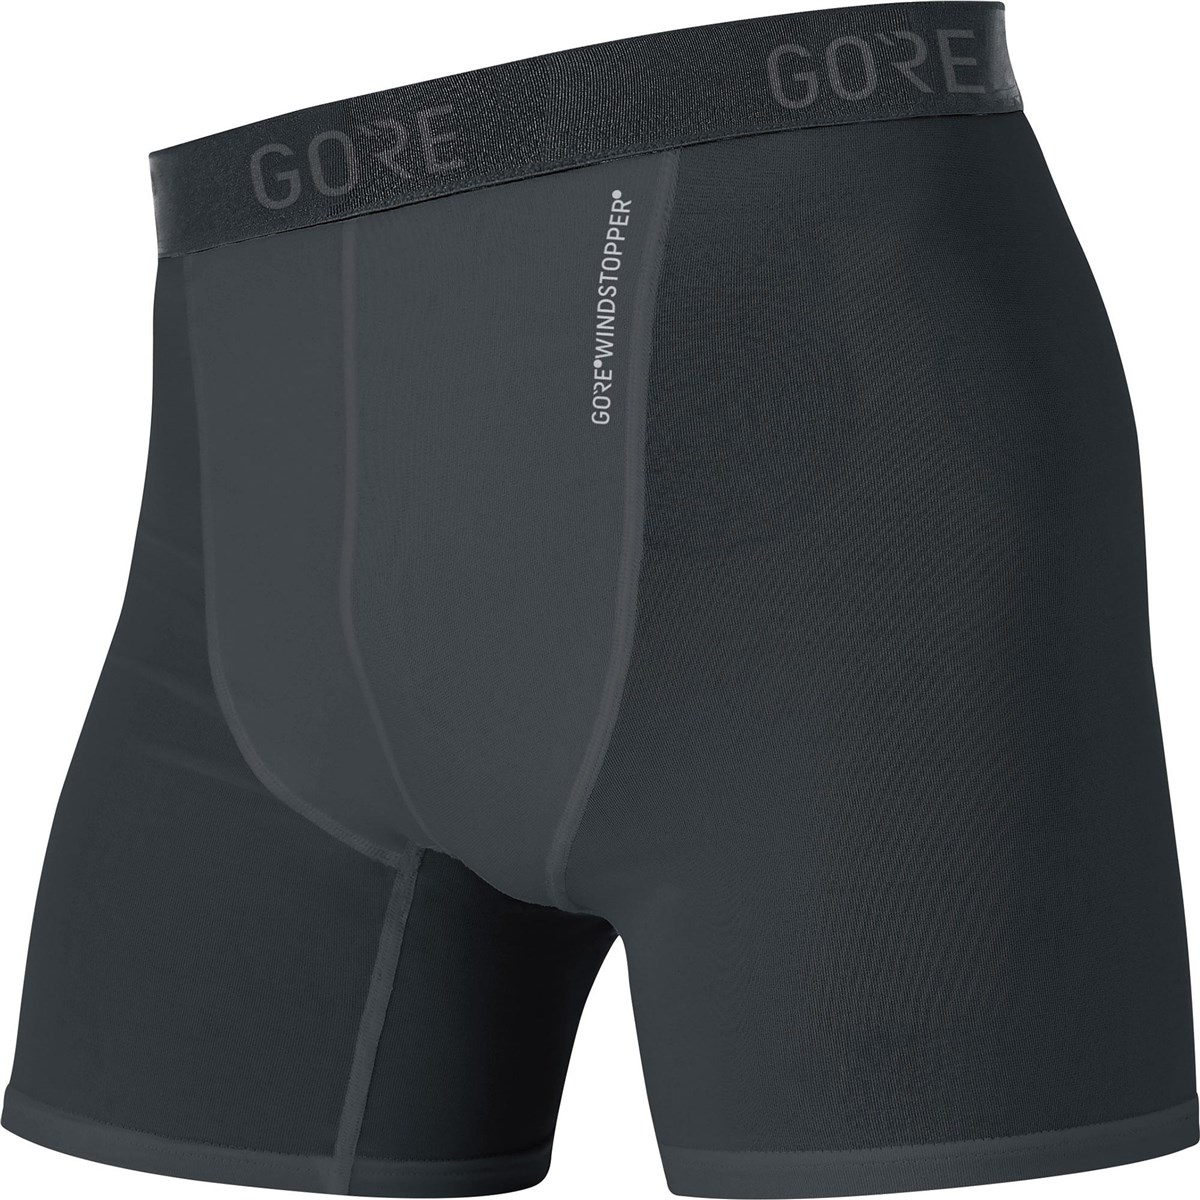 Gore M Windstopper Base Layer Boxer Shorts product image